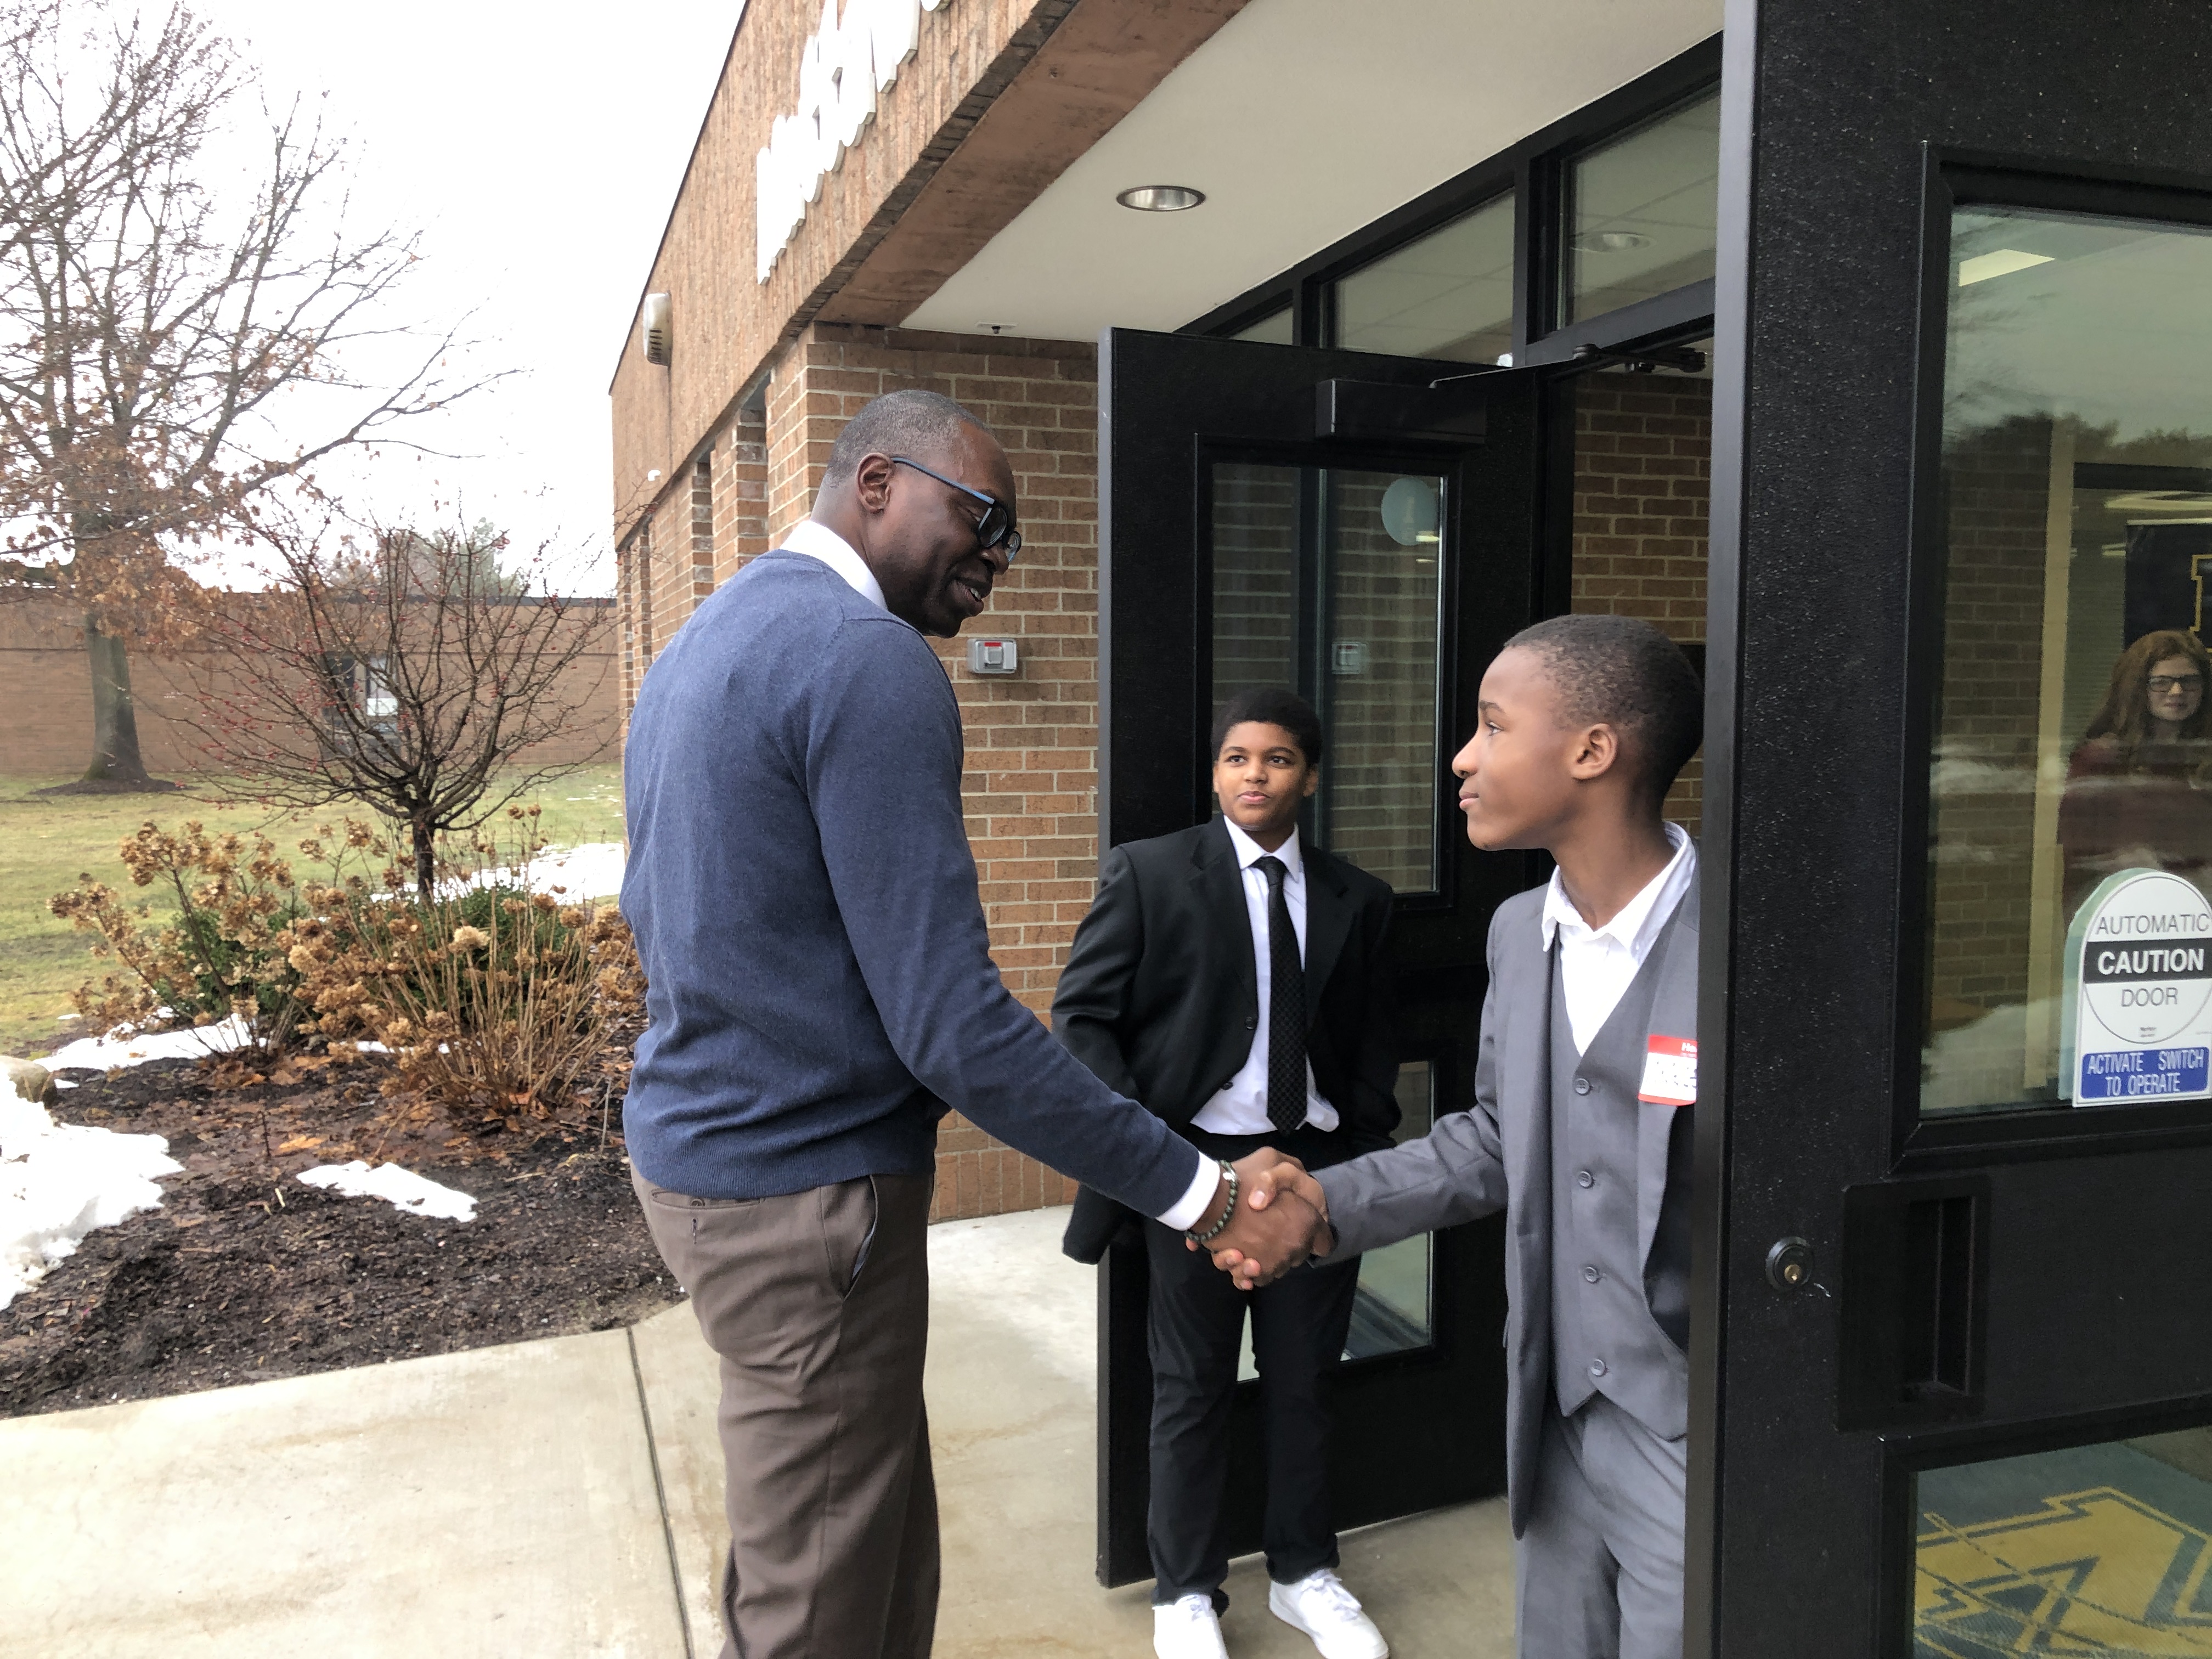 A picture of Lt. Governor Gilchrist shaking hands with a student.